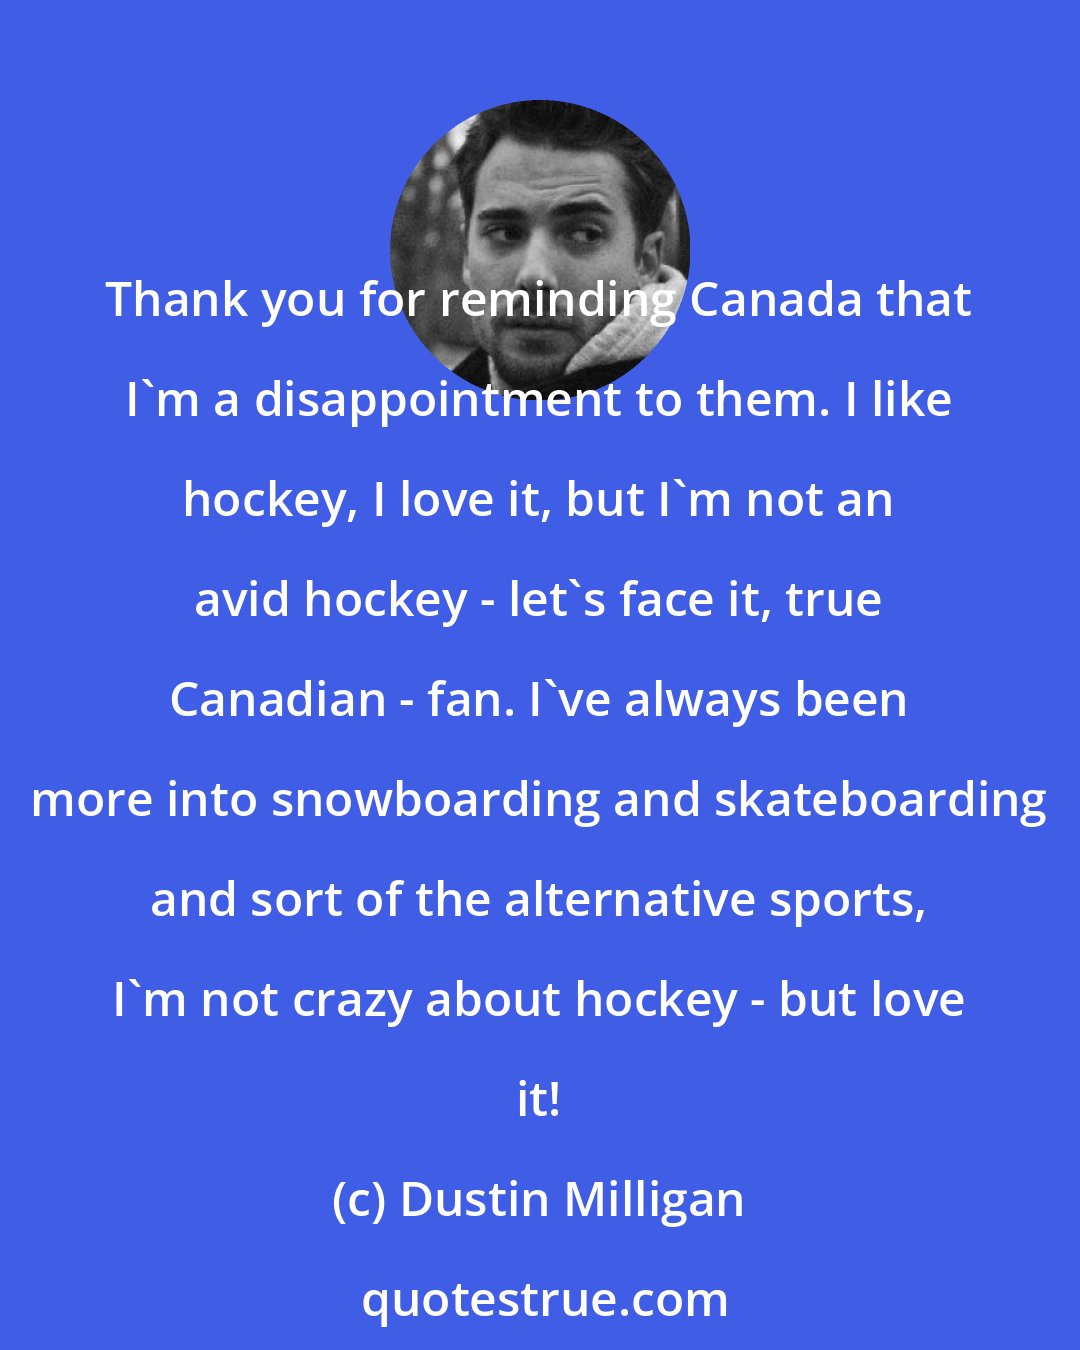 Dustin Milligan: Thank you for reminding Canada that I'm a disappointment to them. I like hockey, I love it, but I'm not an avid hockey - let's face it, true Canadian - fan. I've always been more into snowboarding and skateboarding and sort of the alternative sports, I'm not crazy about hockey - but love it!